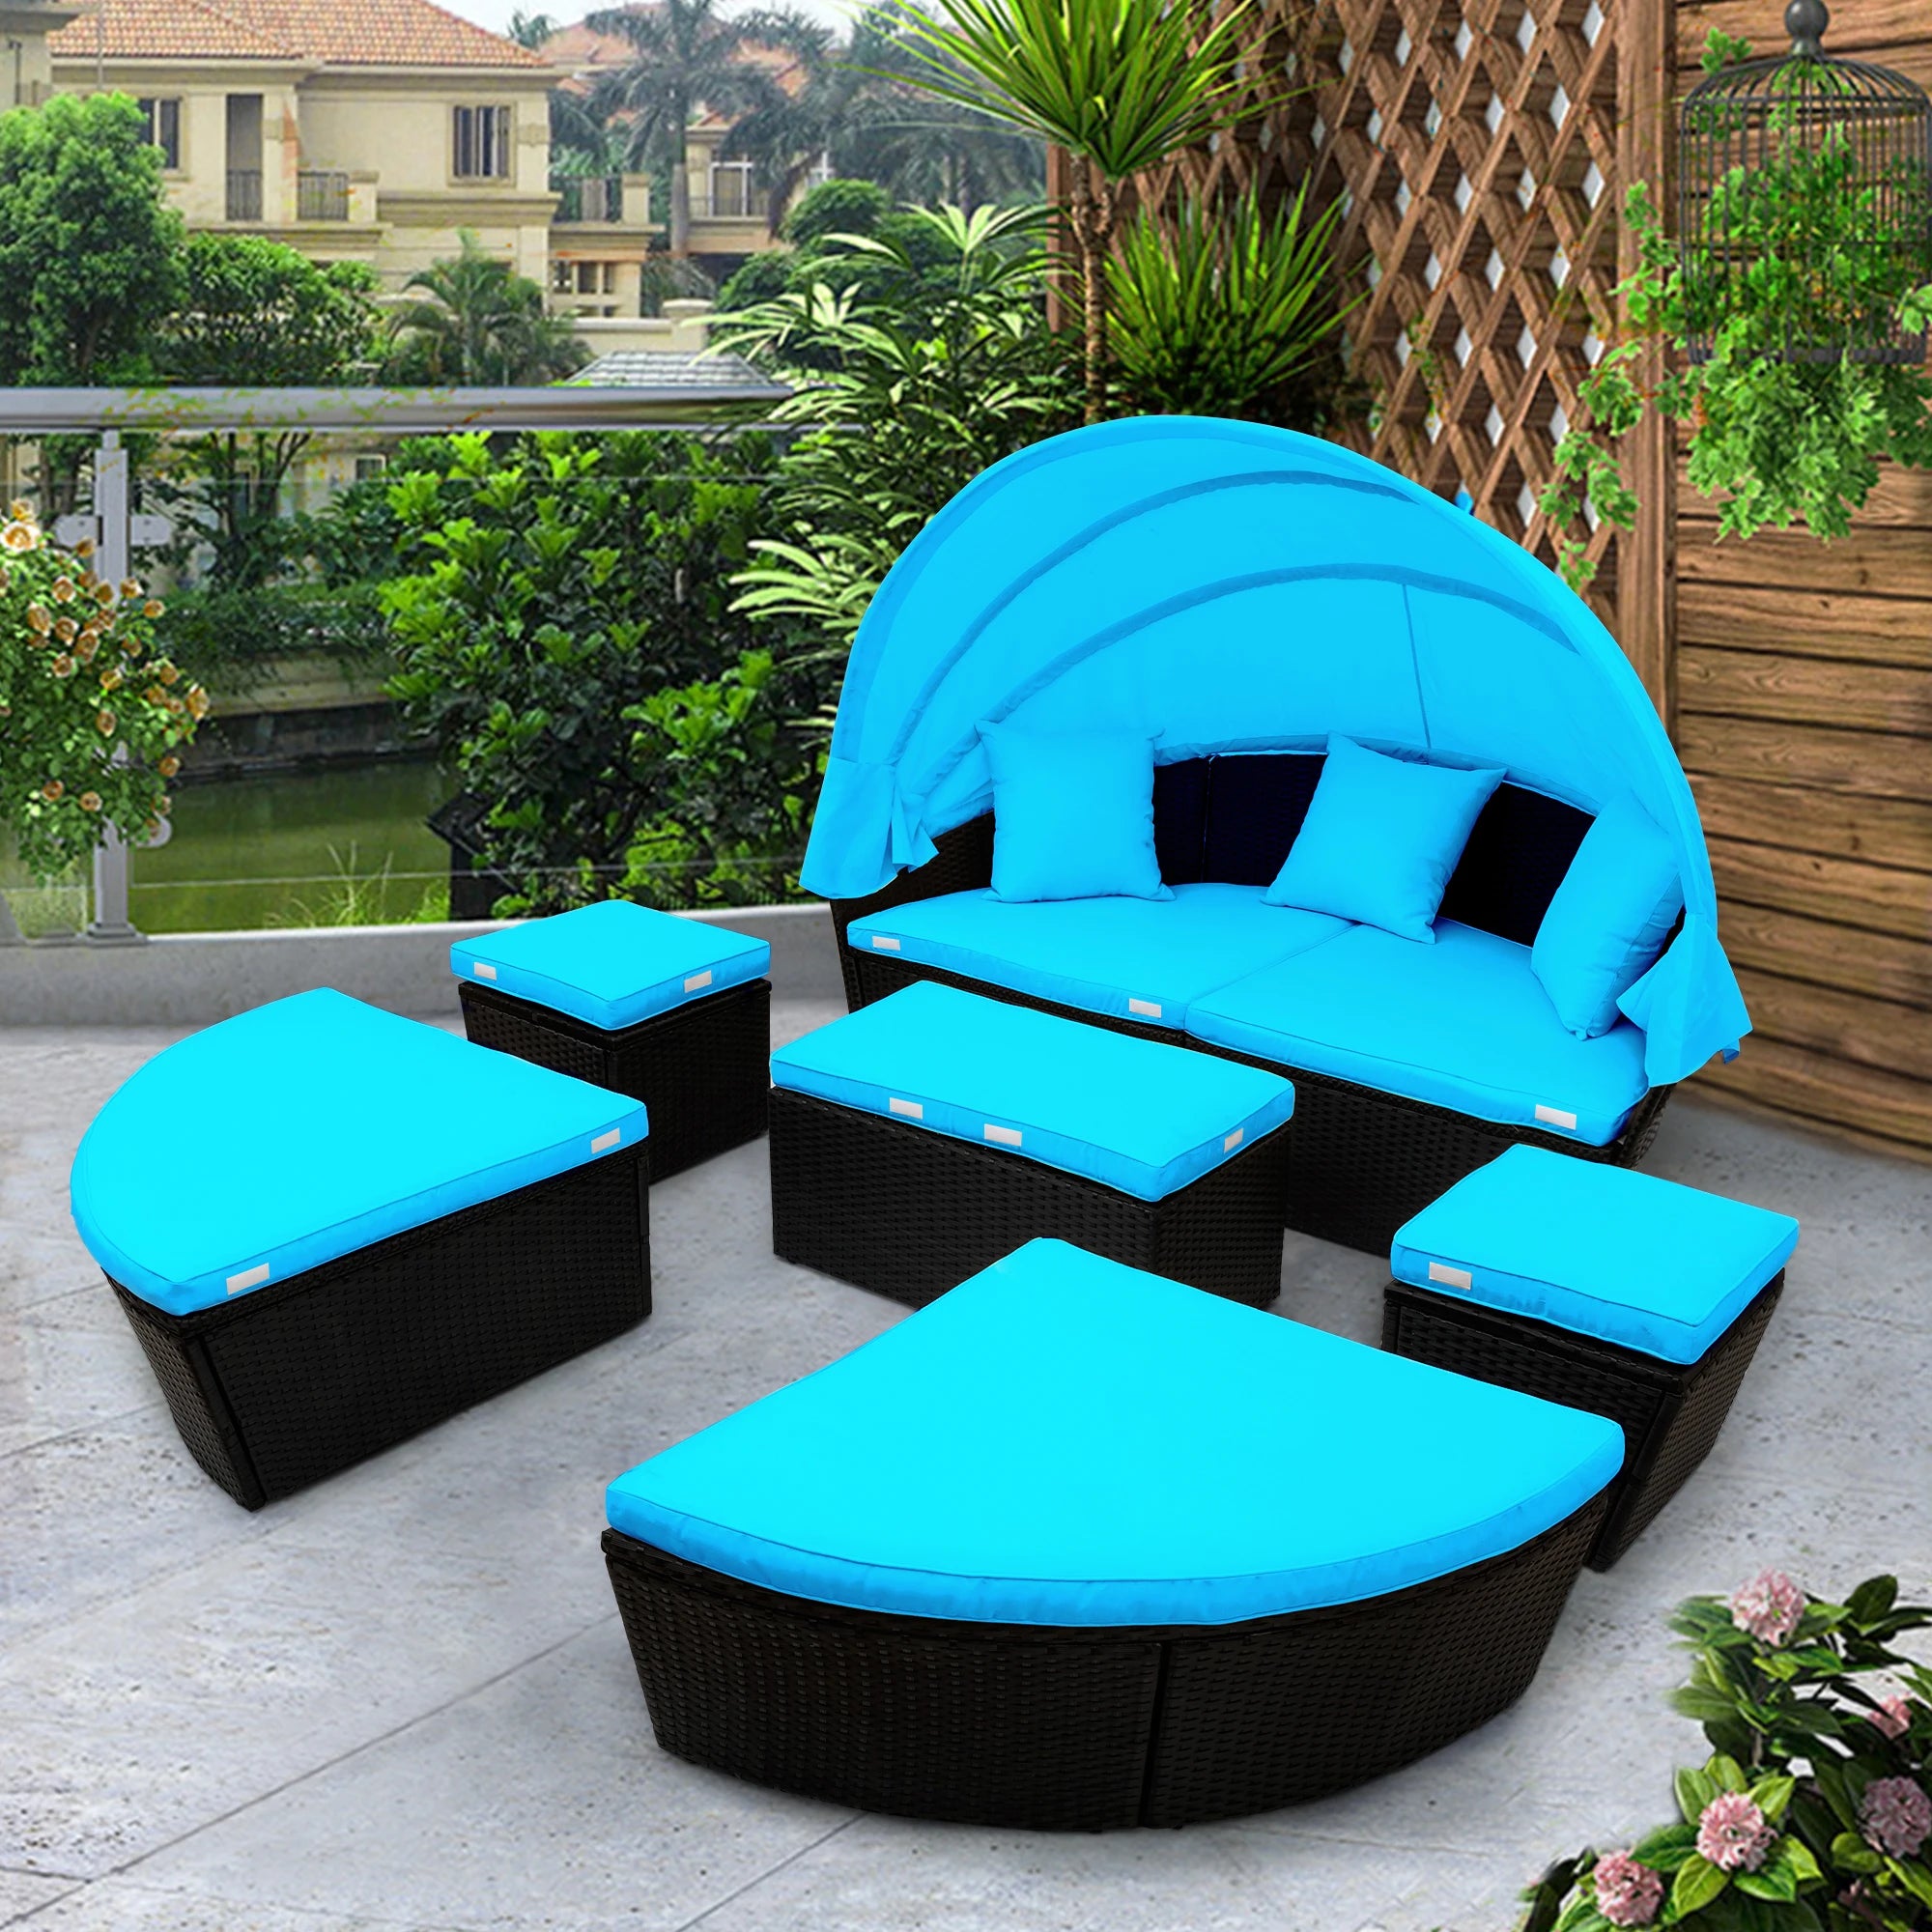 Outdoor rattan daybed sunbed with Retractable Canopy Wicker Furniture, Round Outdoor Sectional Sofa Set, black Wicker Furniture